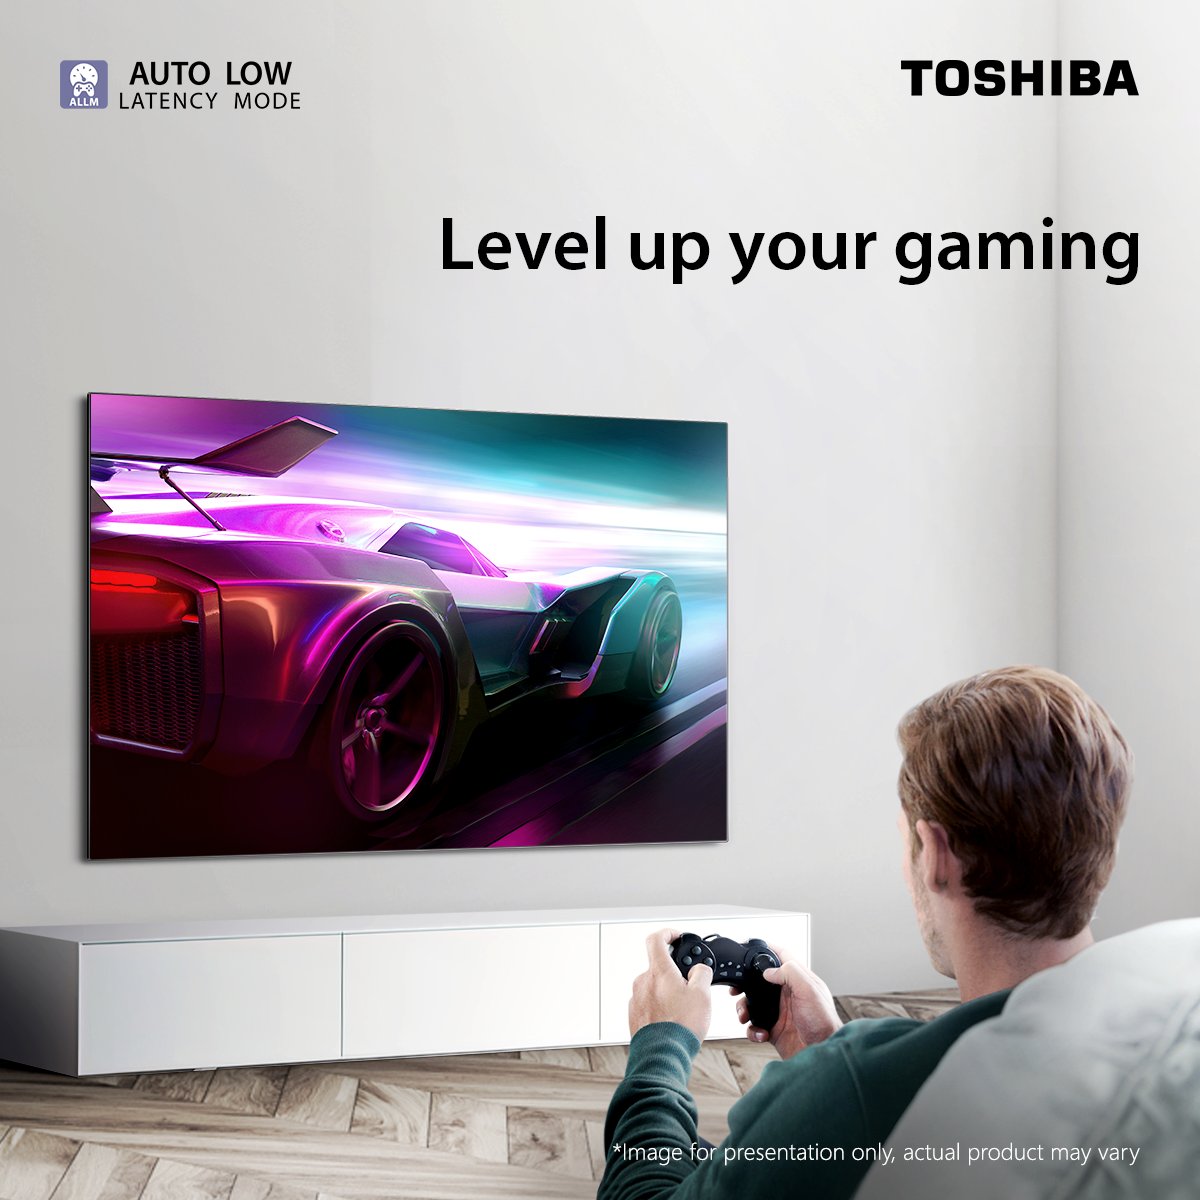 Toshiba TV Global on X: Level up your gaming with the Toshiba TV Auto Low  Latency Mode (ALLM). Experience smooth, lag-free viewing & interactivity.  Say goodbye to lag and hello to real-time